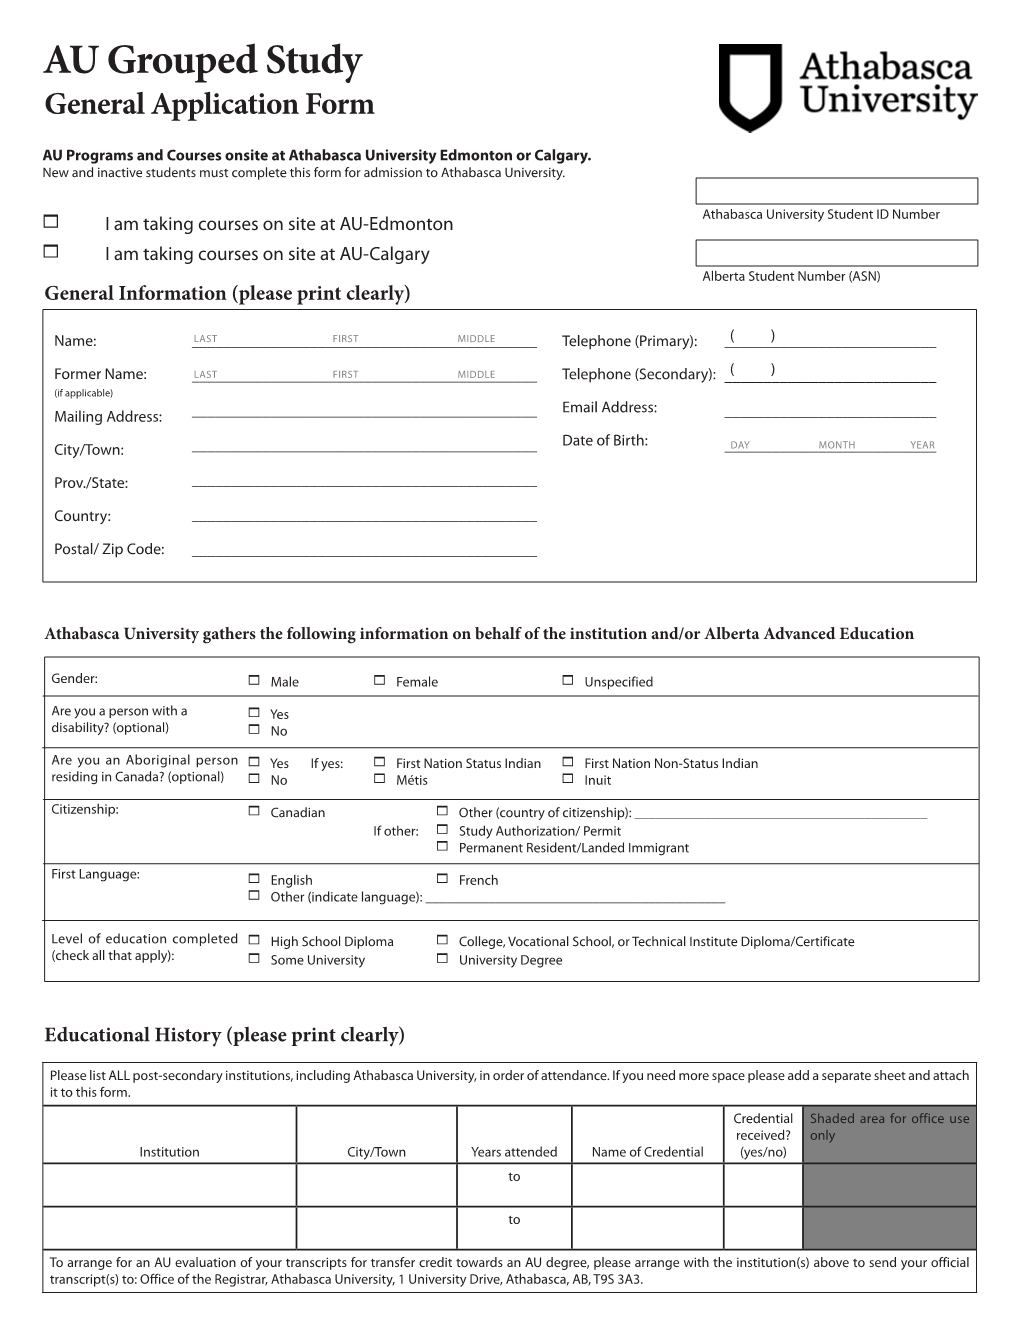 AU Grouped Study General Application Form